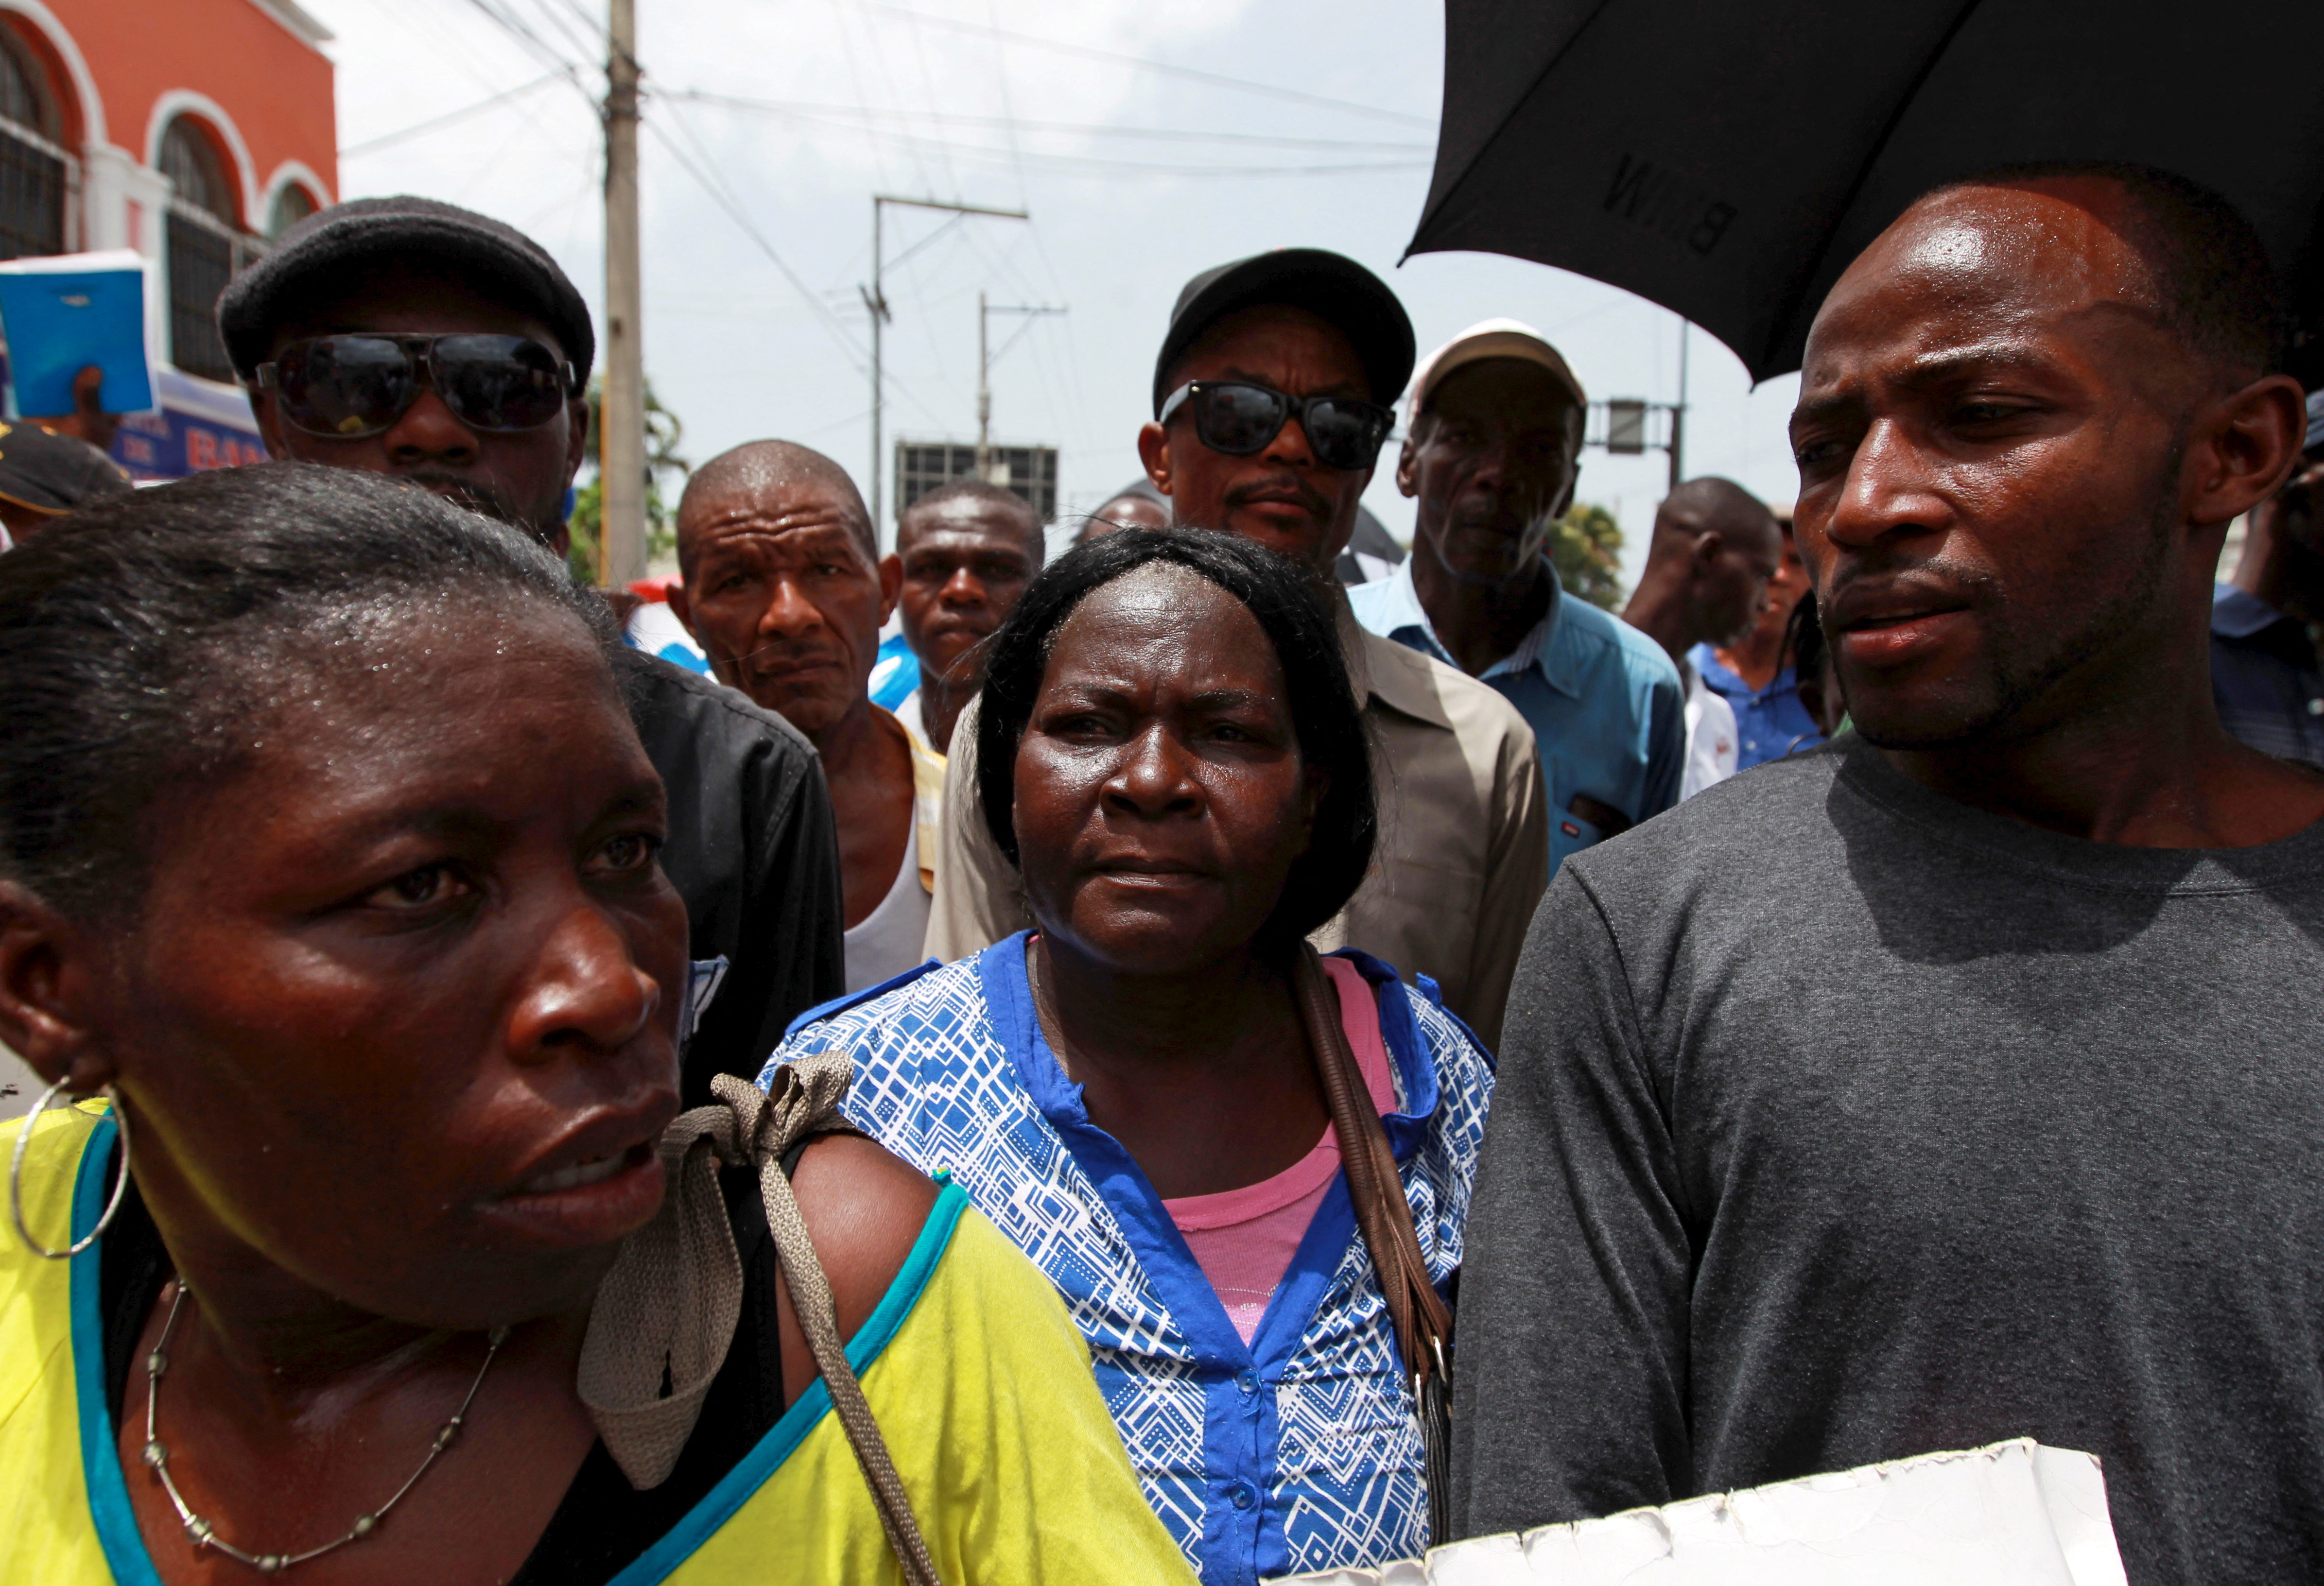 Hundreds of Haitians participate in a march organized by sugar cane workers in Santo Domingo